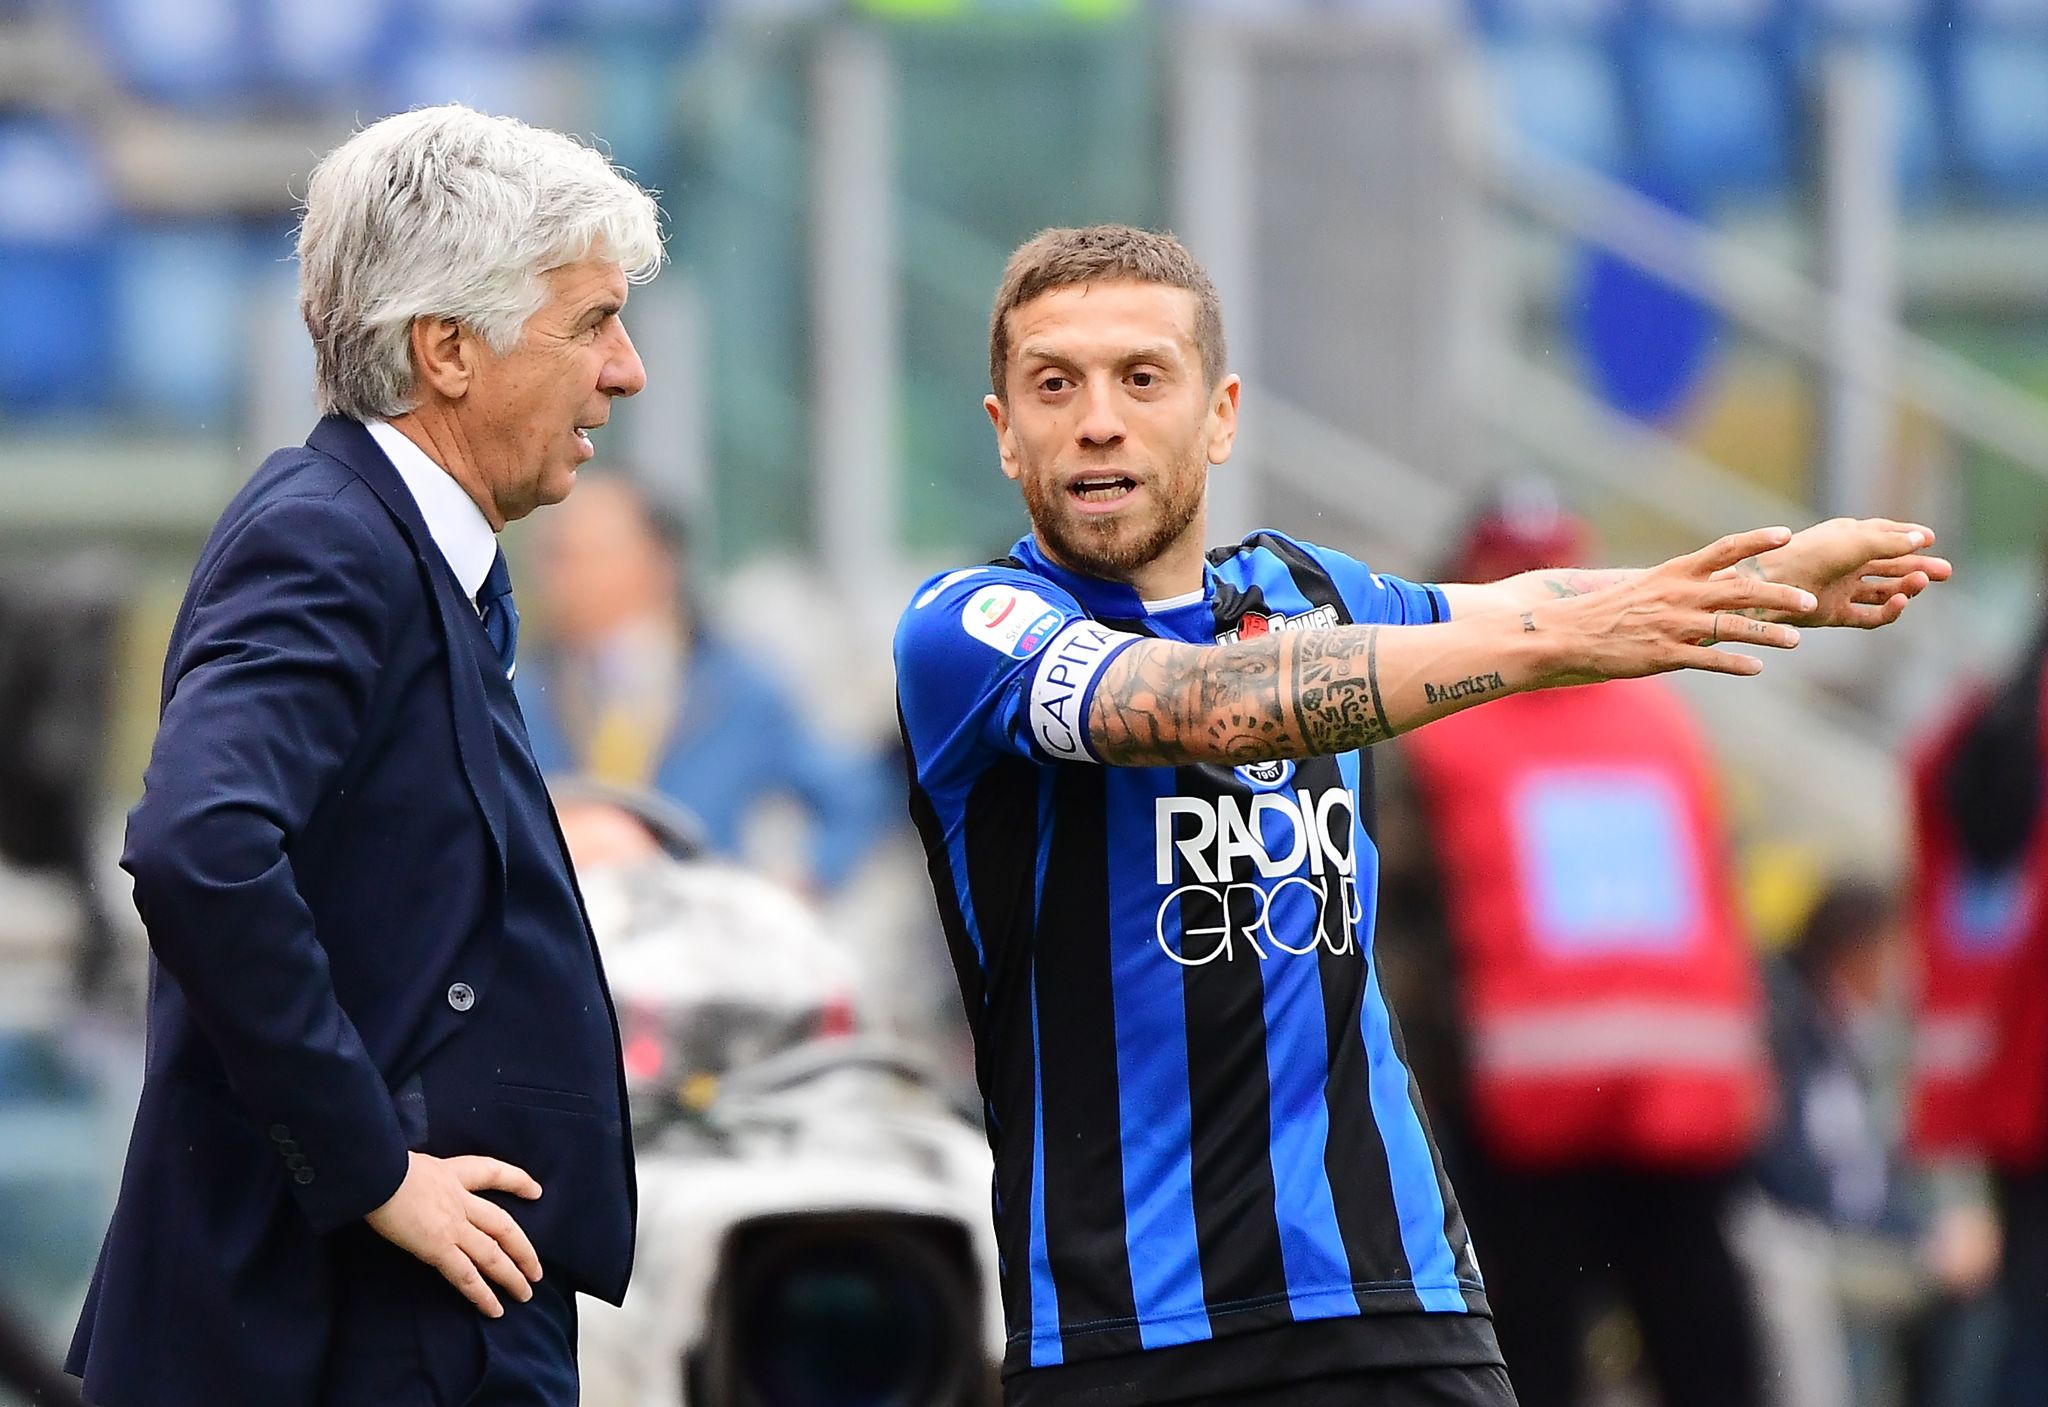 (FILES) In this file photo taken on May 05, 2019 lt;HIT gt;Atalanta lt;/HIT gt;'s coach from Italy Gian Piero Gasperini (L) talks with lt;HIT gt;Atalanta lt;/HIT gt;'s forward from Argentina Alejandro lt;HIT gt;Gomez lt;/HIT gt; during the Italian Serie A football match Lazio vs lt;HIT gt;Atalanta lt;/HIT gt; on May 5, 2019 at the Olympic stadium in Rome. - According to press reports, lt;HIT gt;Atalanta lt;/HIT gt;'s President Antonio Percassi has accepted the idea of lt;HIT gt;Gomez lt;/HIT gt; leaving in January 2021. Several Italian clubs are said to be on the lookout, including AC Milan, but the Paris SG of lt;HIT gt;Gomez lt;/HIT gt;' fellow countryman Angel Di Maria has also been cited as a possible destination. (Photo by Vincenzo PINTO / AFP)